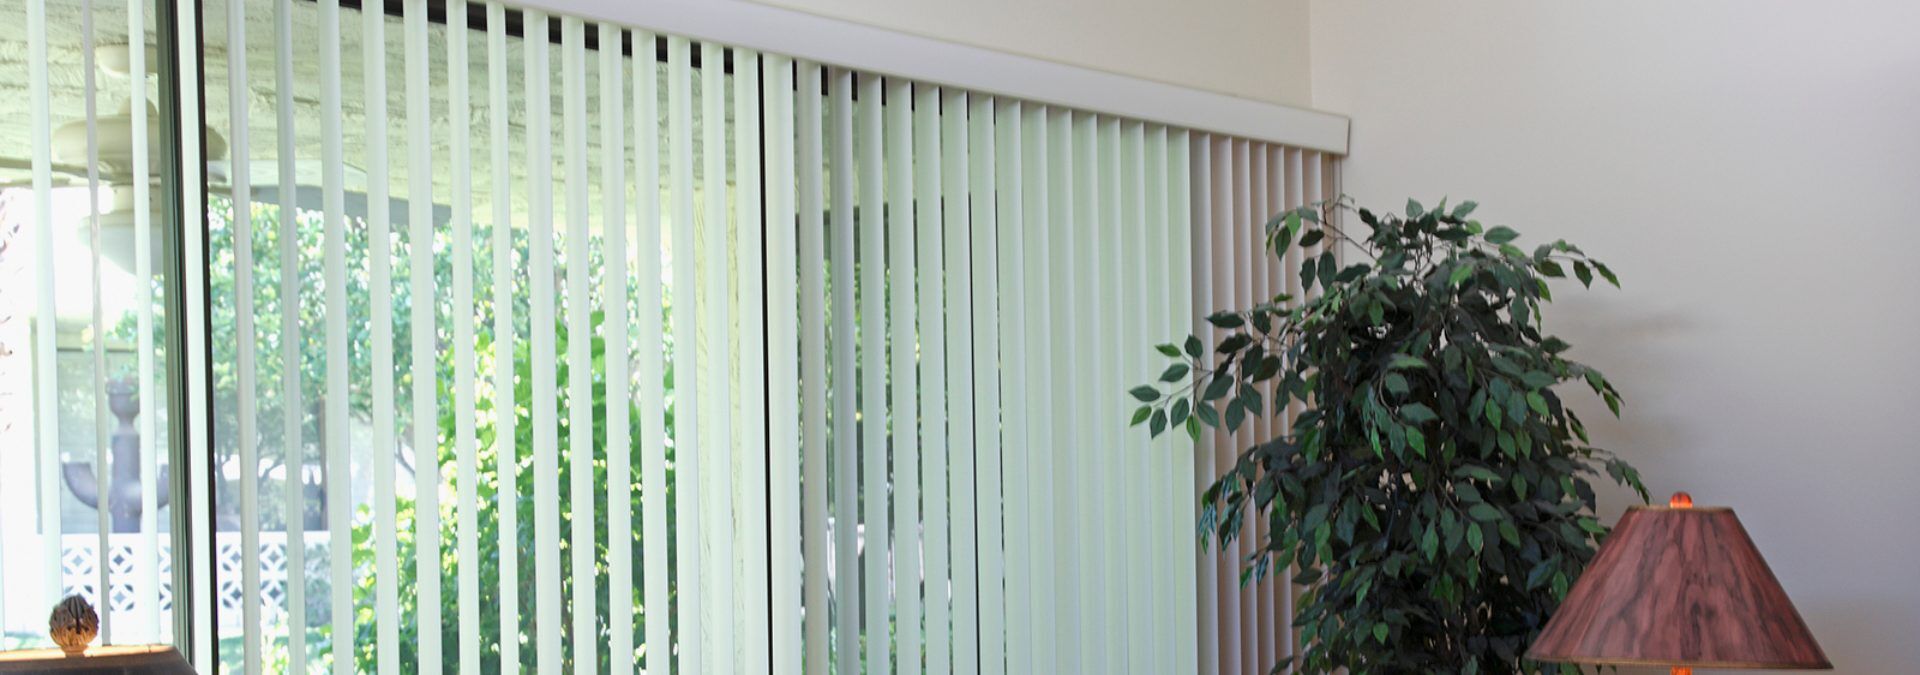 Vertical Blinds | Installation of Blinds & Curtains | Call 0800 836 587